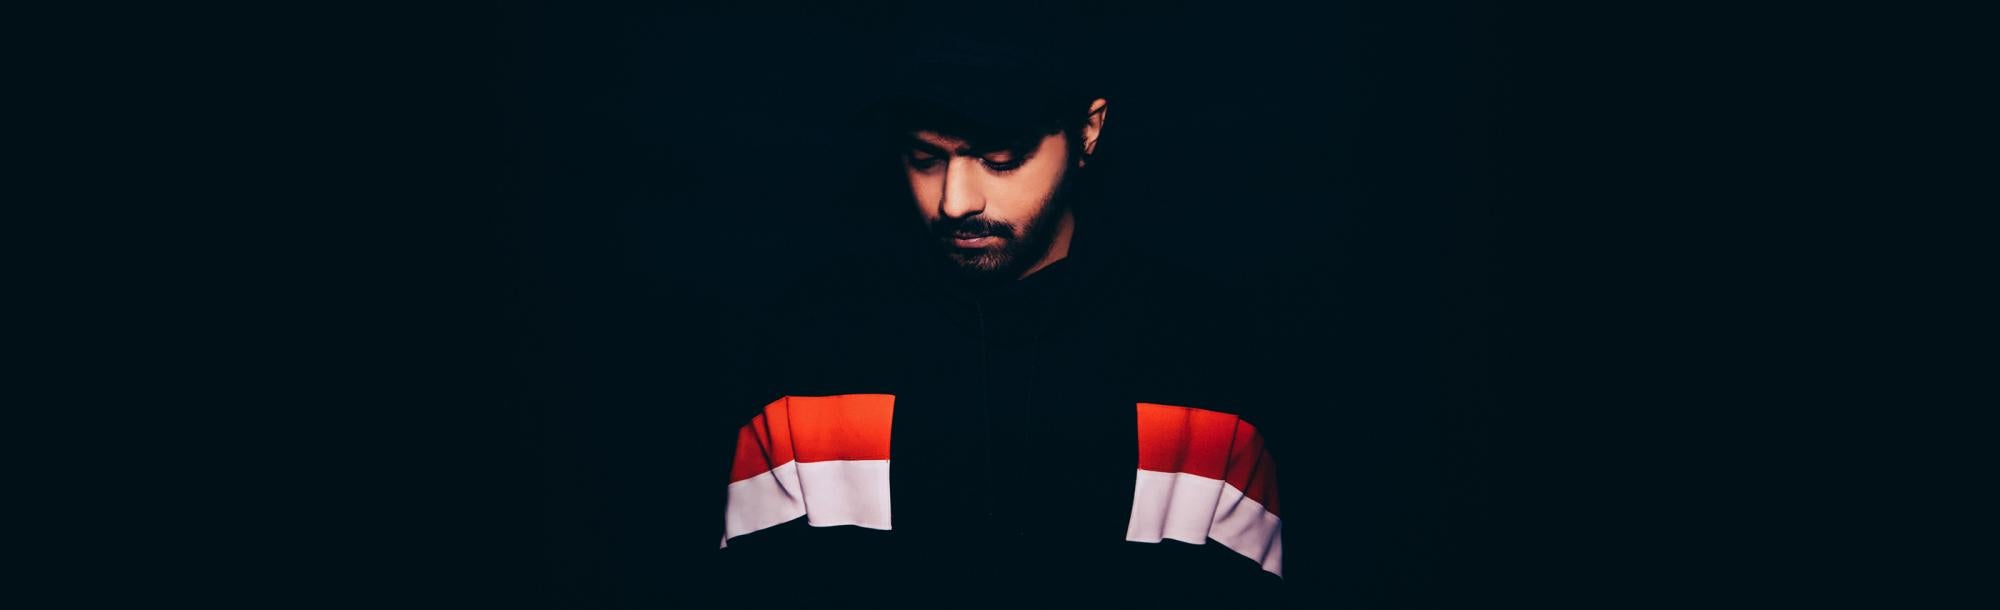 Jai Wolf looking downward, wearing mostly black clothing and standing against a black background.